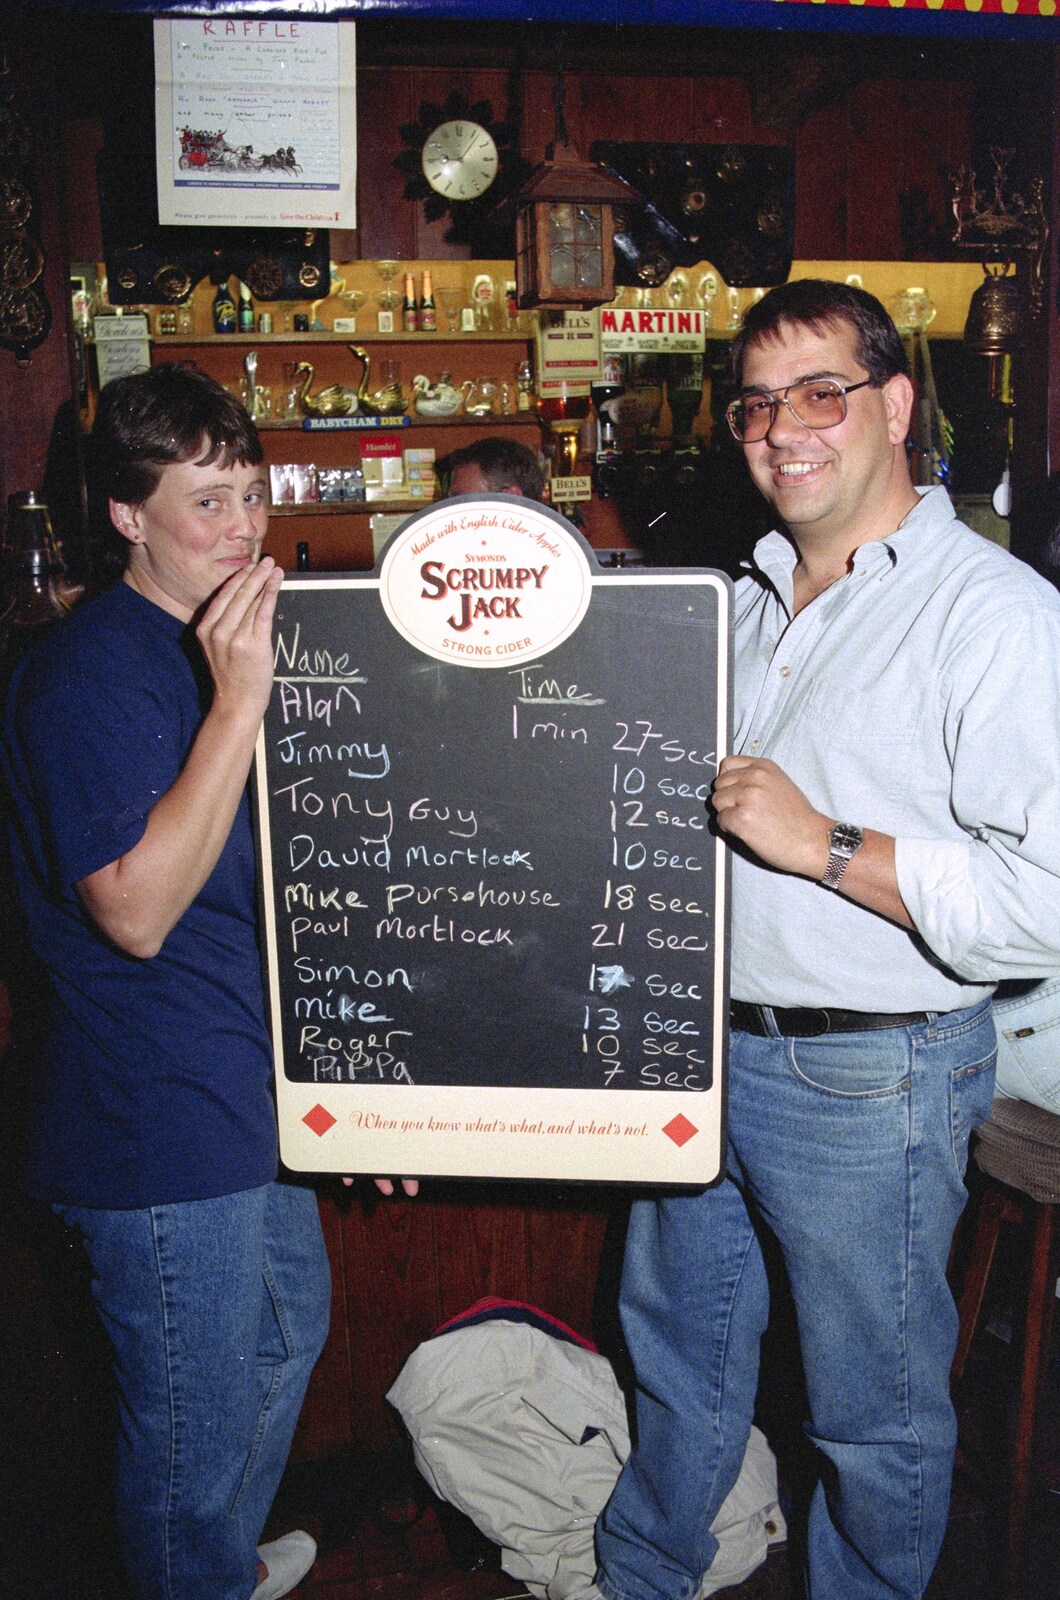 Pippa and Roger hold up the results list from A Welly Boot of Beer at the Swan Inn, Brome, Suffolk - 15th June 1996